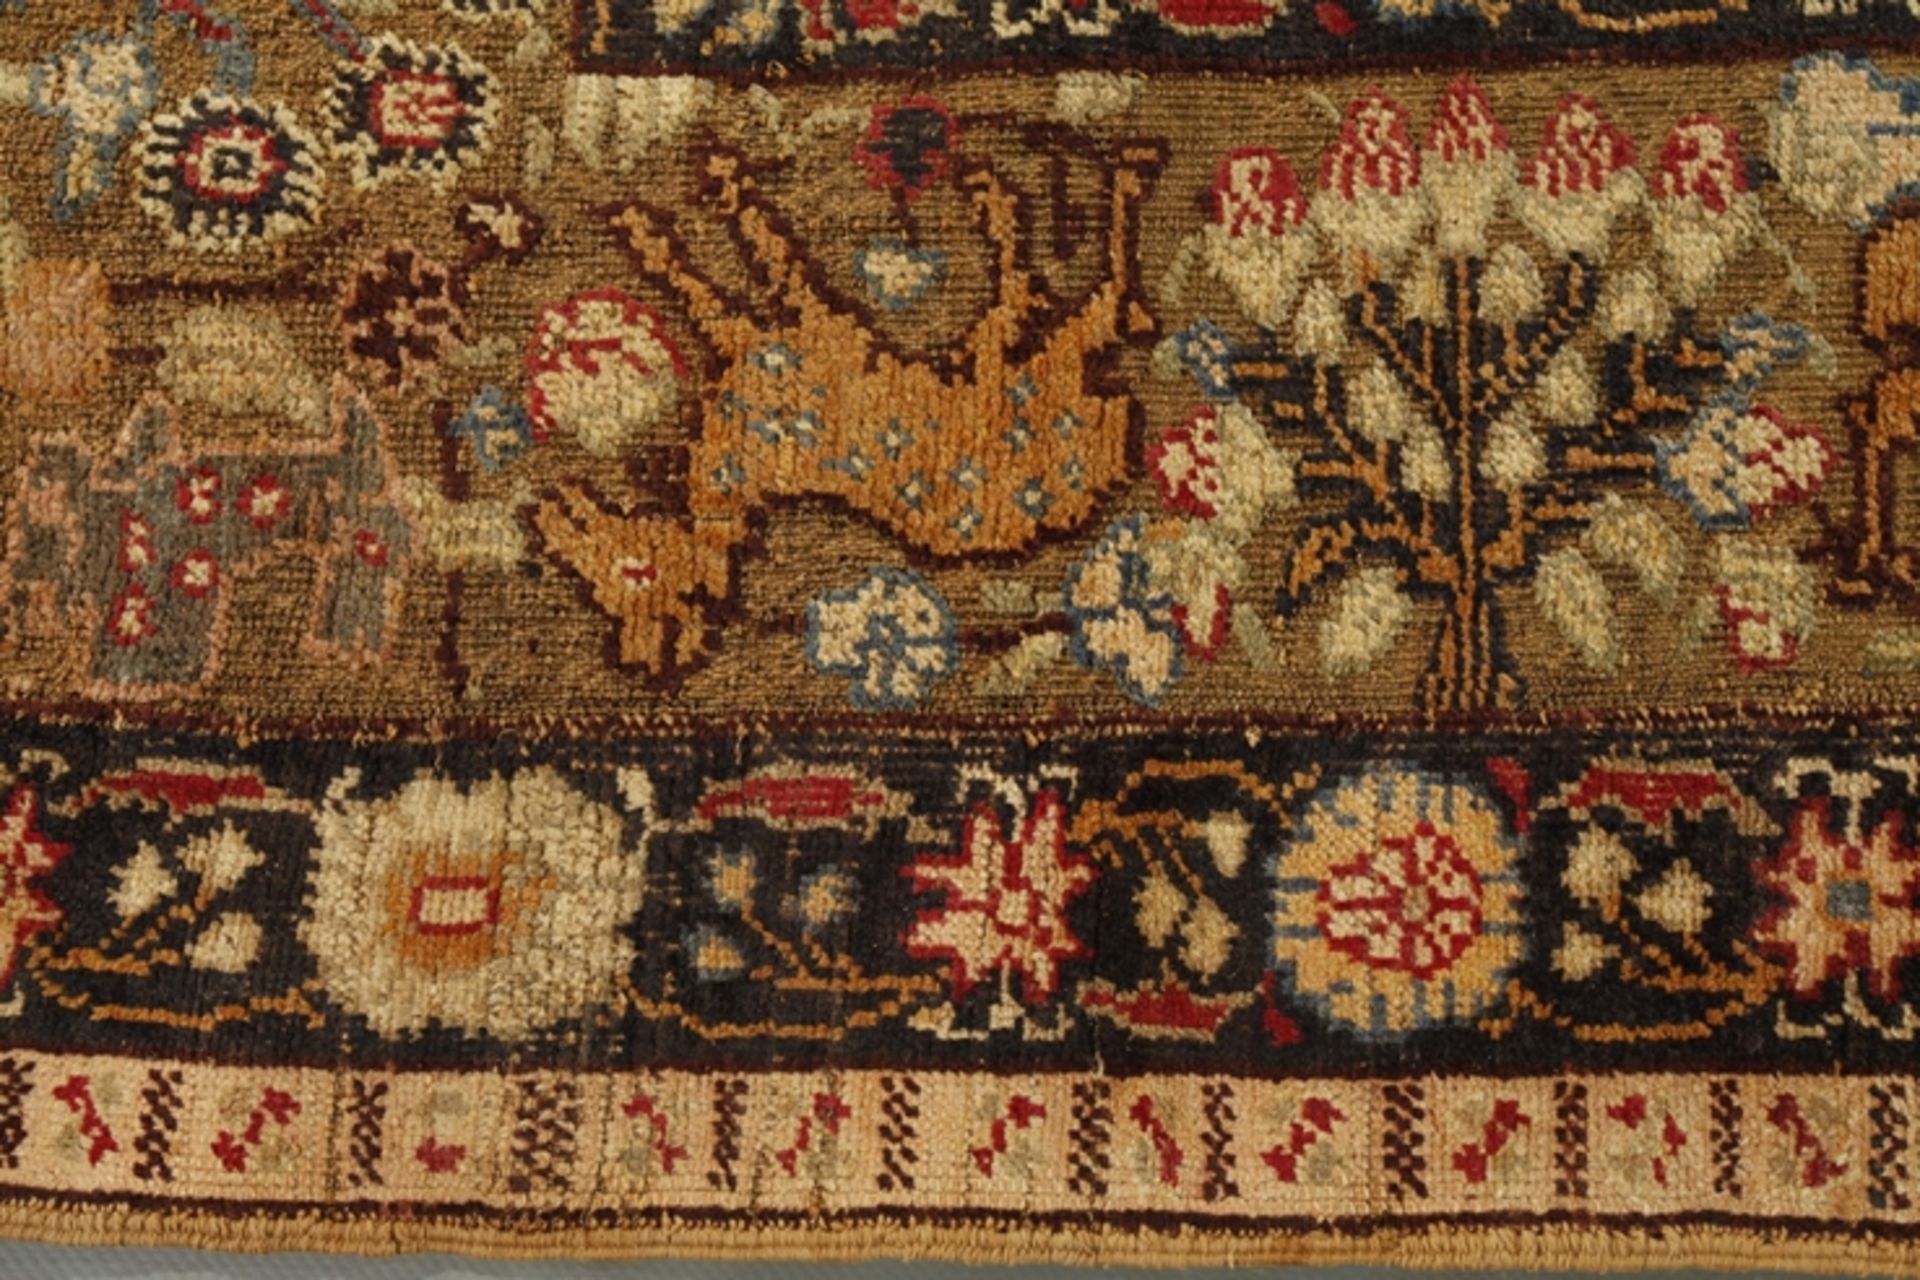 Tapestry  - Image 4 of 5